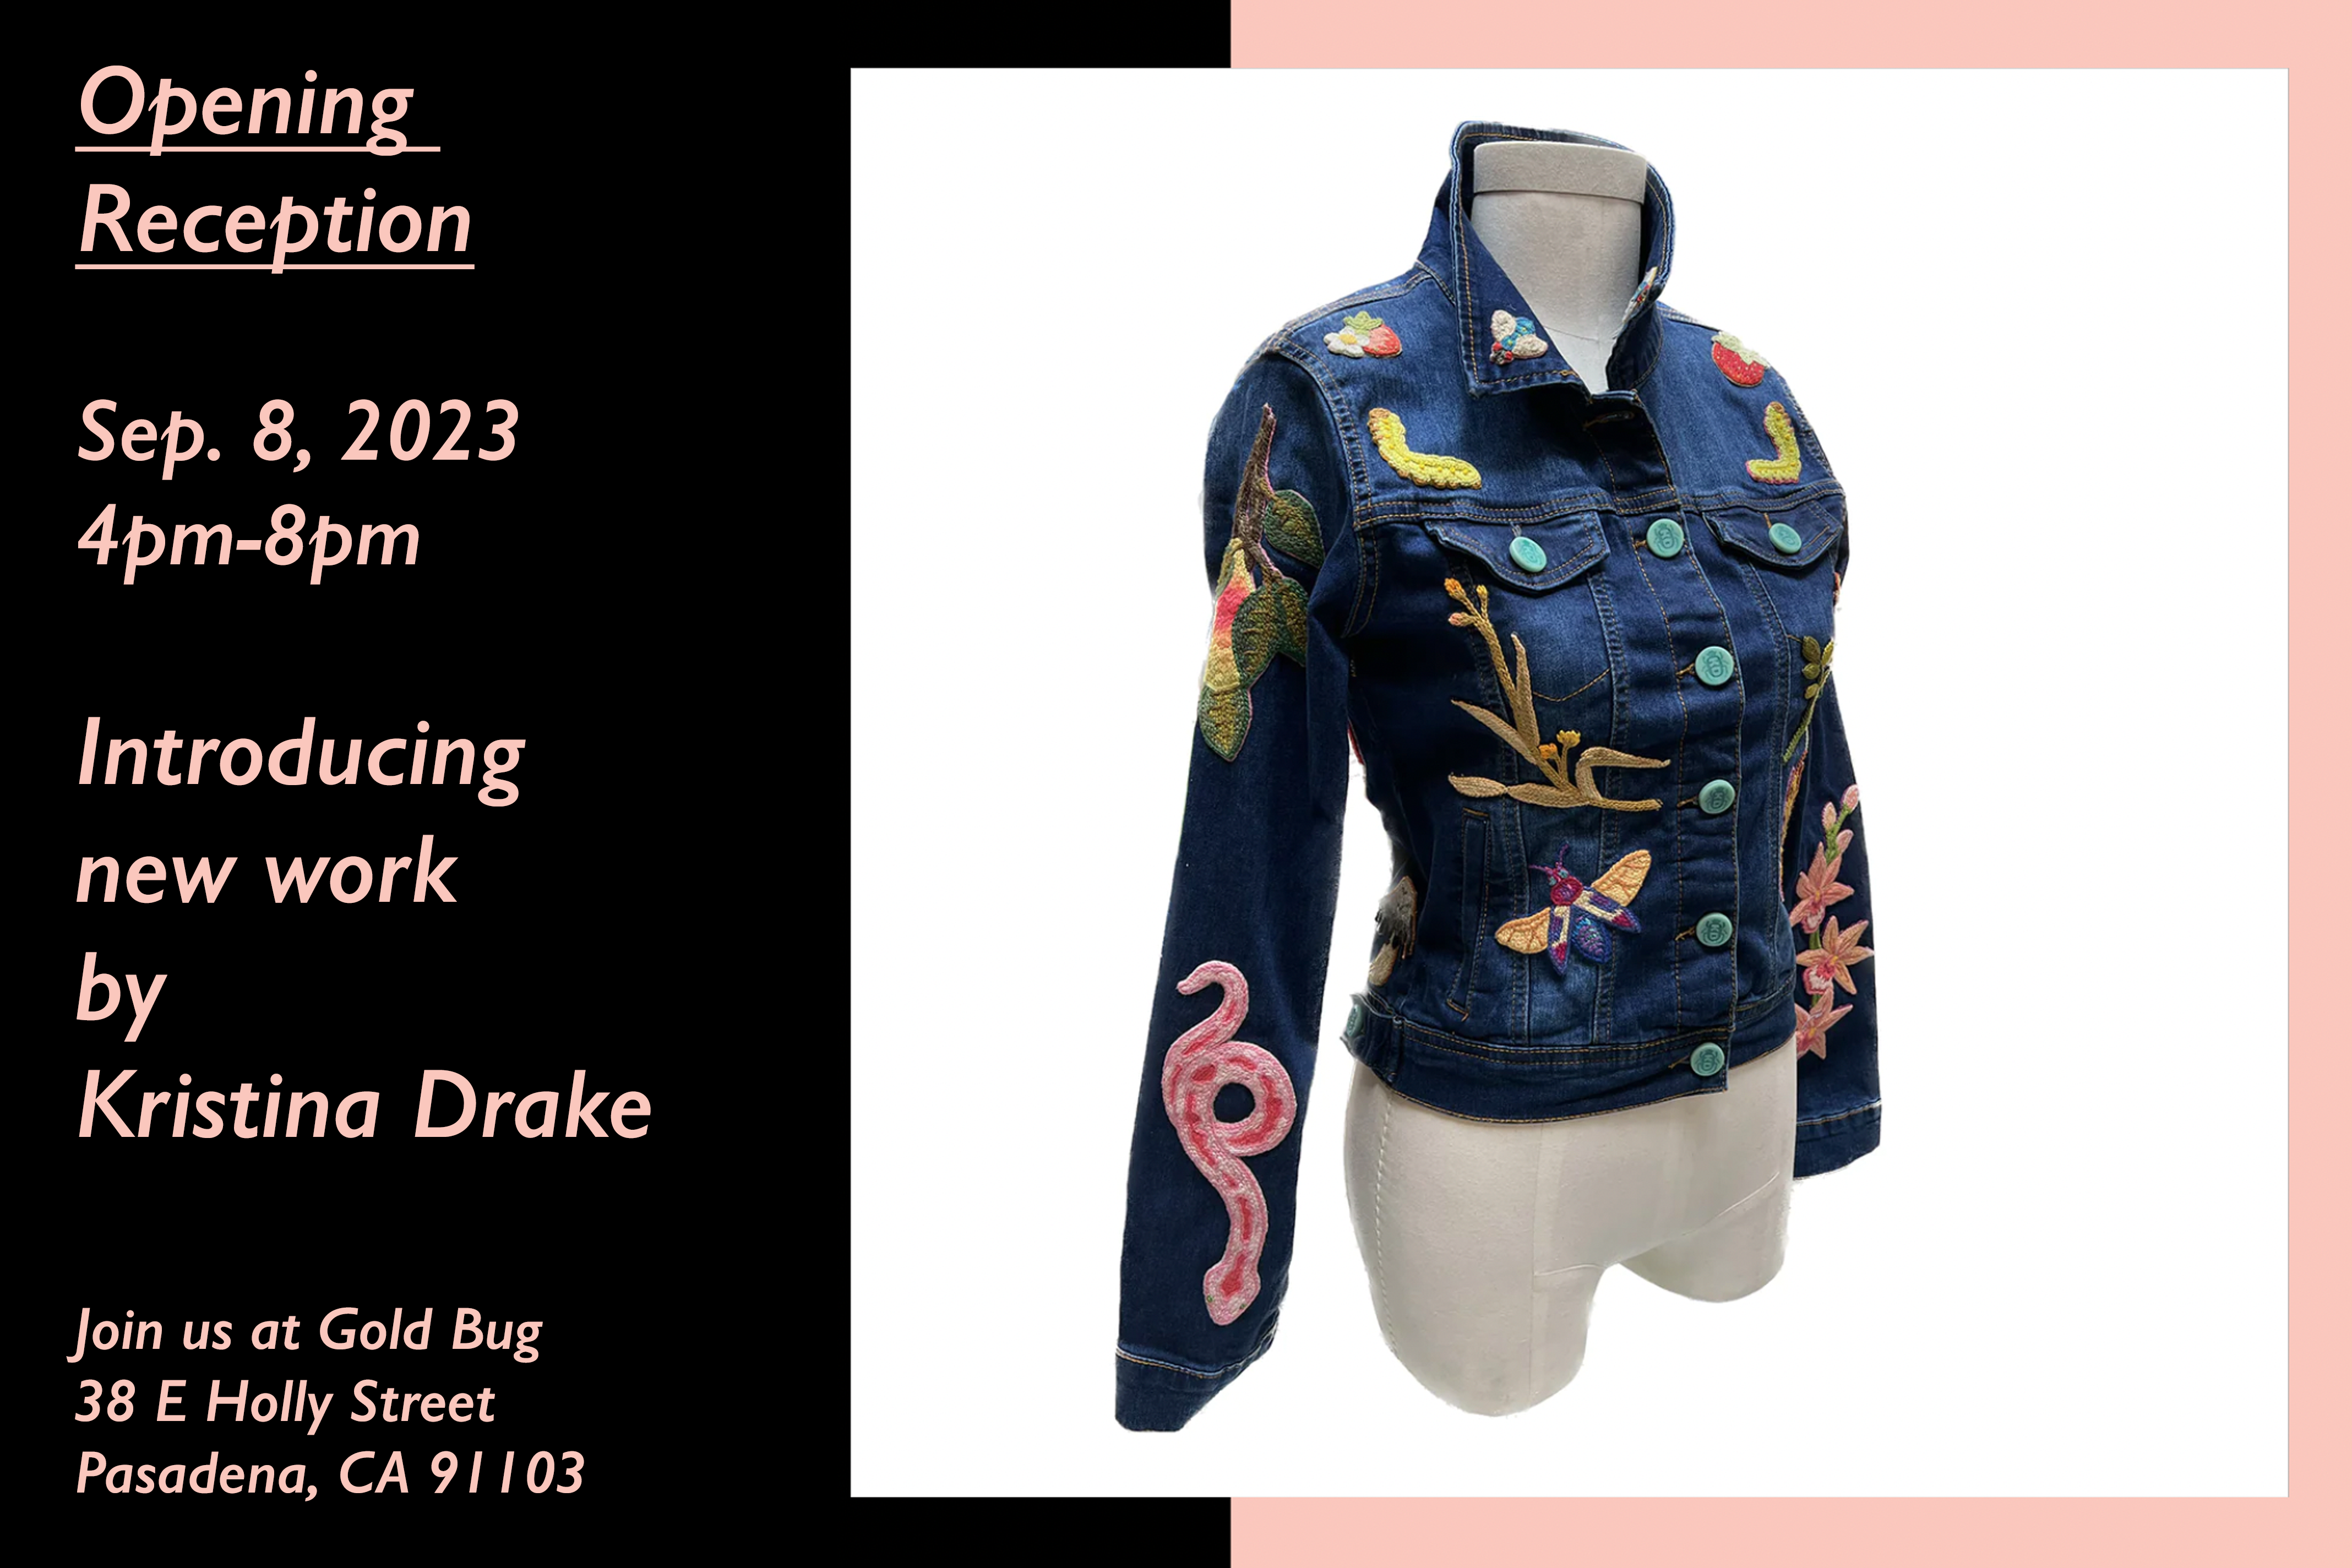 Invitation to opening reception for Kristina Drake's Apparel Exhibit on September 8, 2023 featuring a photo of the jean jackets that will be shown